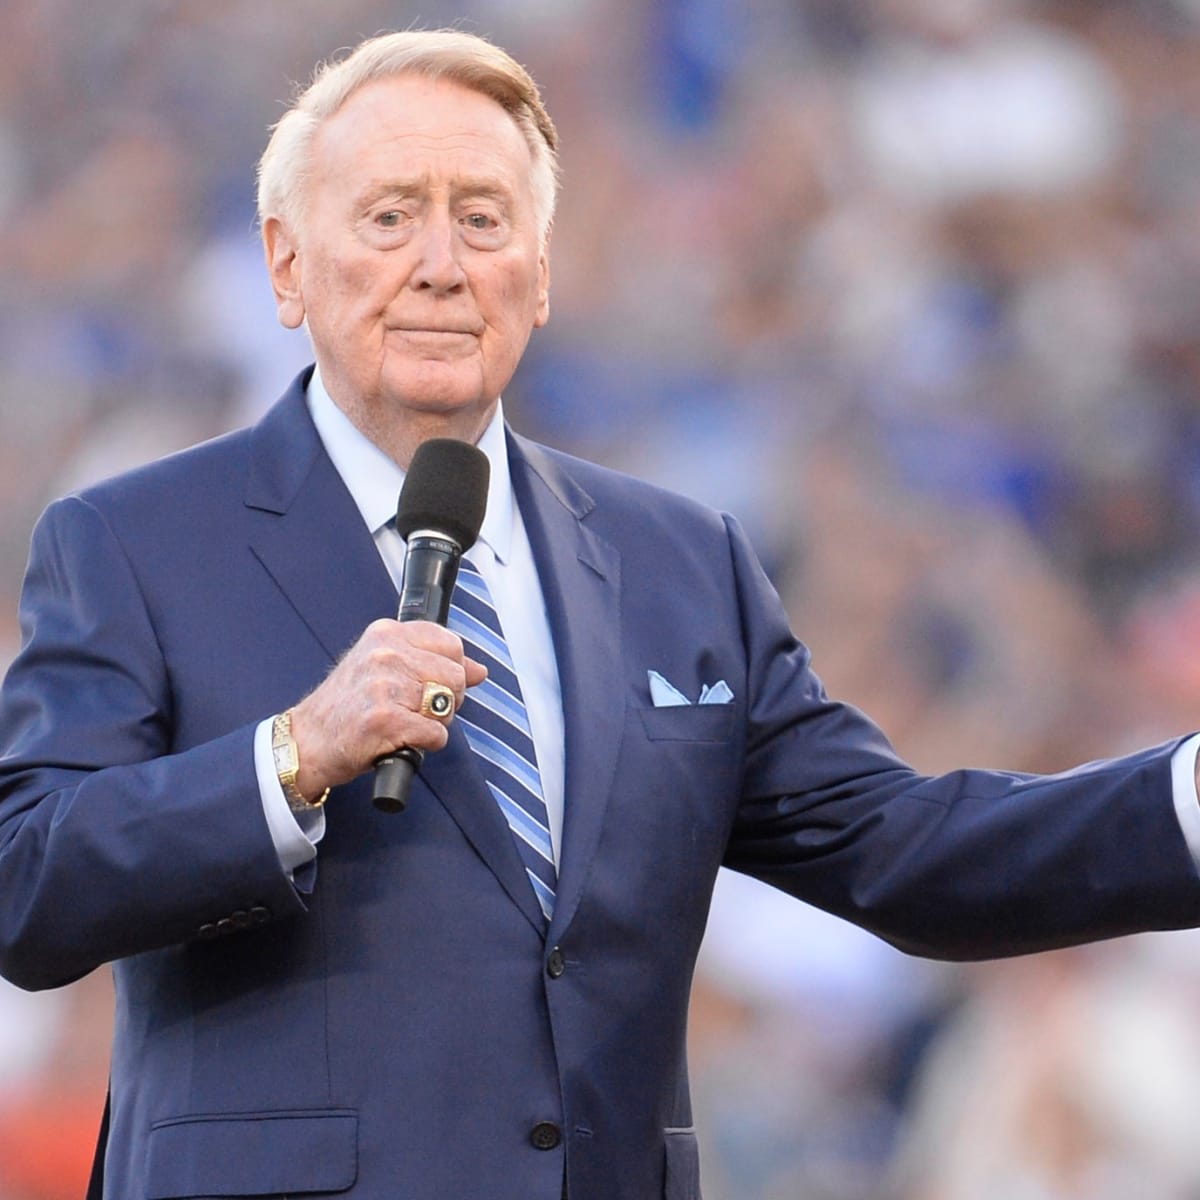 Vin Scully, legendary Dodgers baseball broadcaster, dies at 94